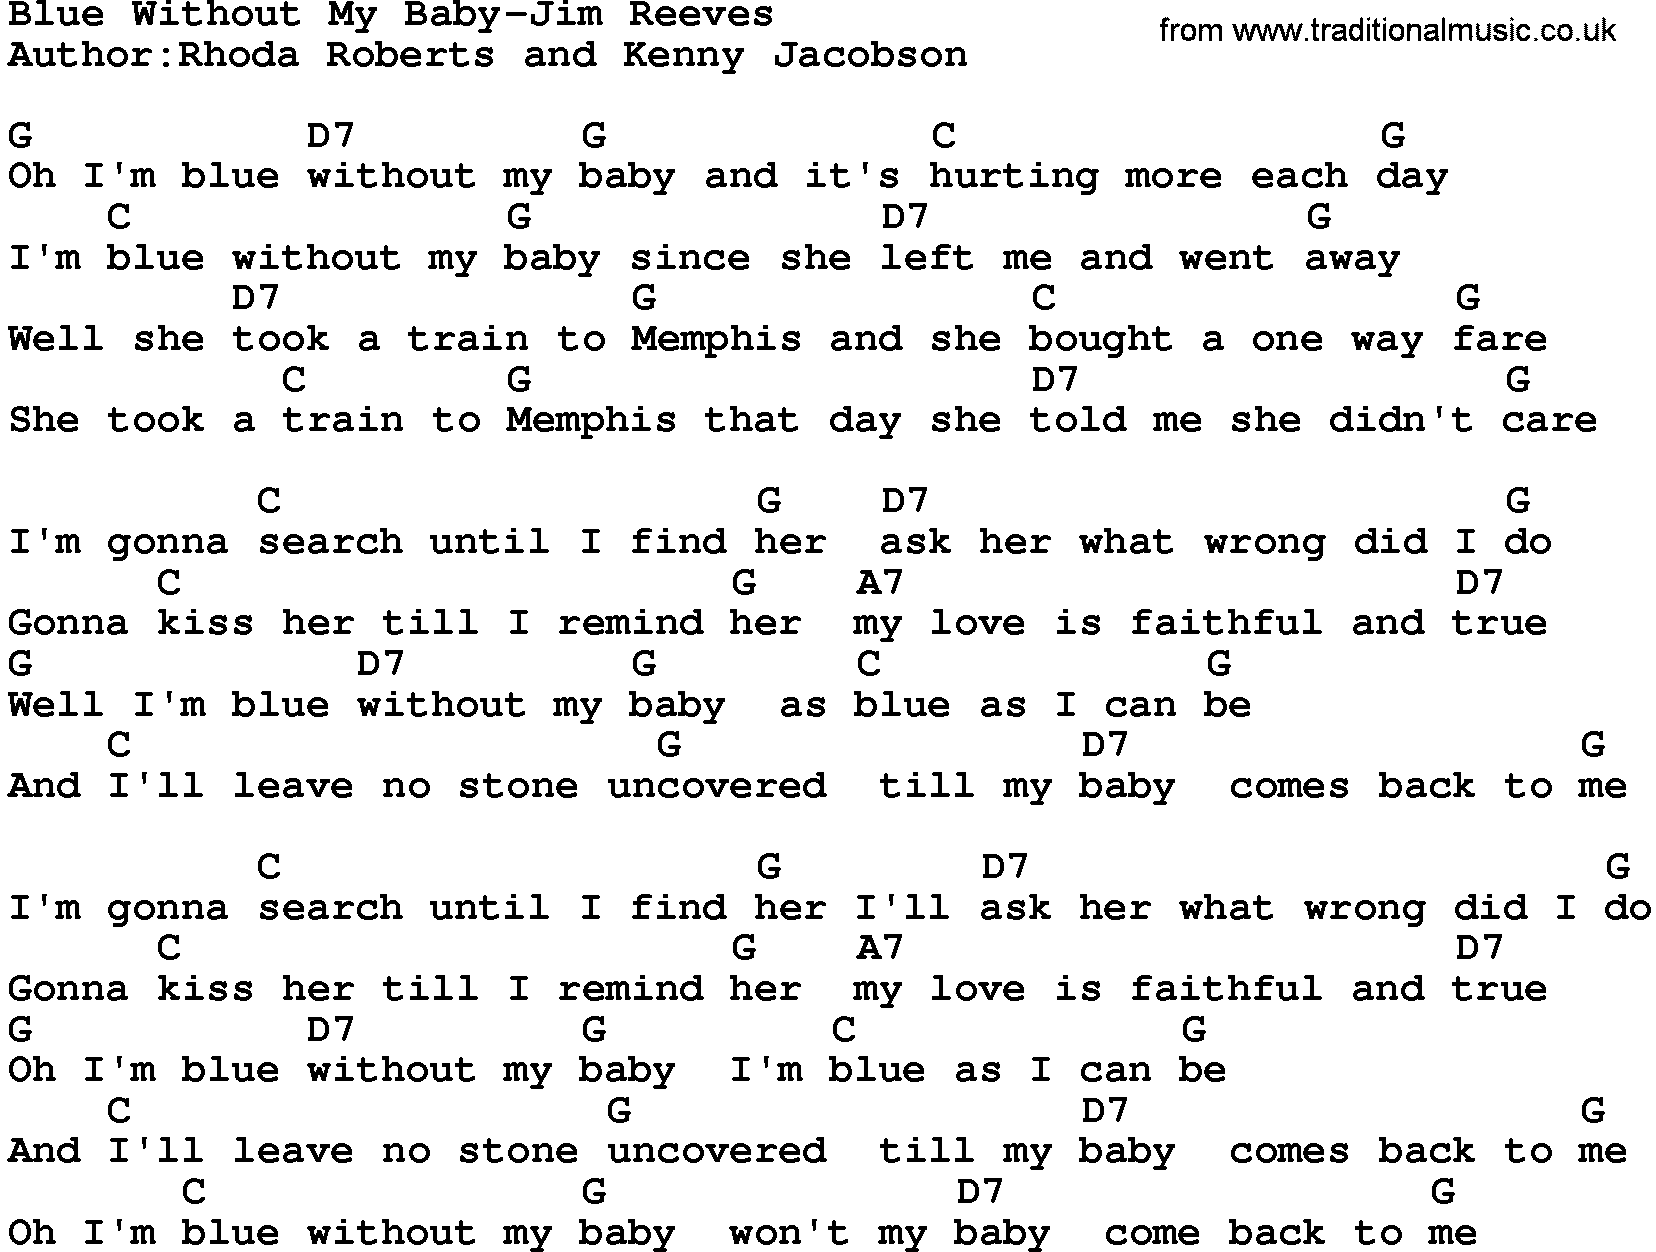 Country music song: Blue Without My Baby-Jim Reeves lyrics and chords